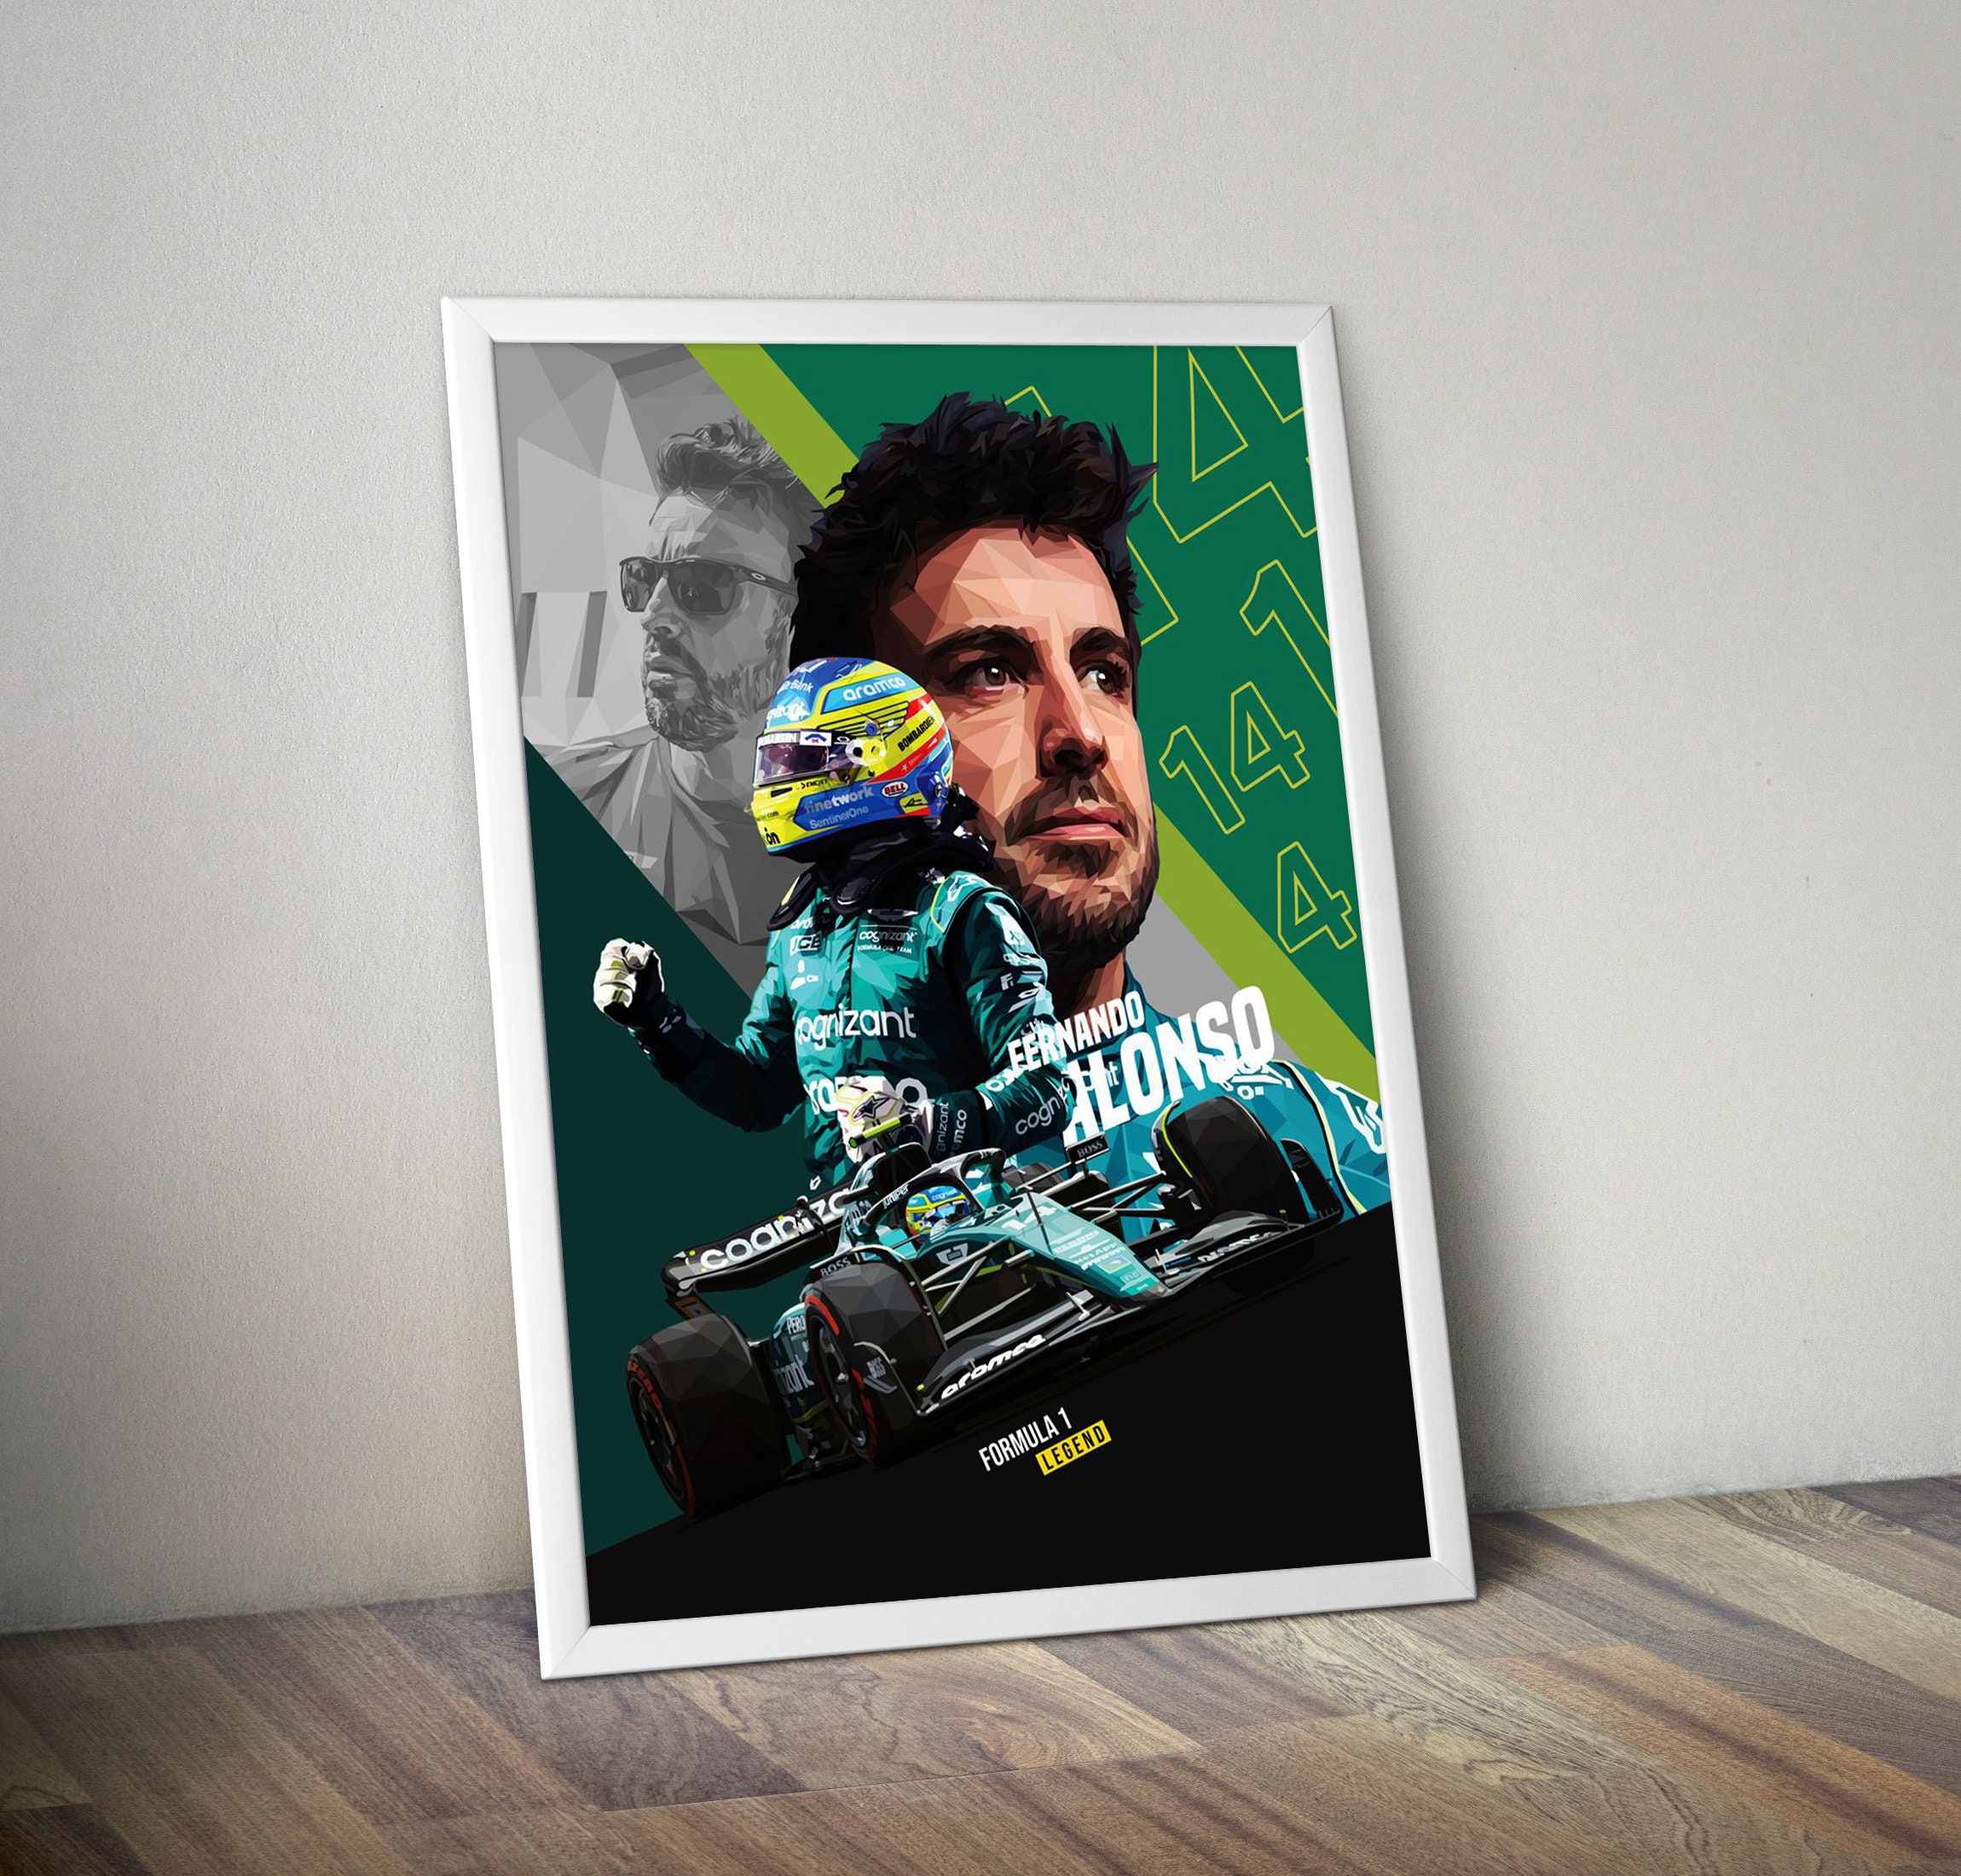 Fernando Alonso 2005 2006 Poster Poster Art Decor Mural Funny Print Wall  Home Modern Painting Decoration Vintage No Frame - AliExpress